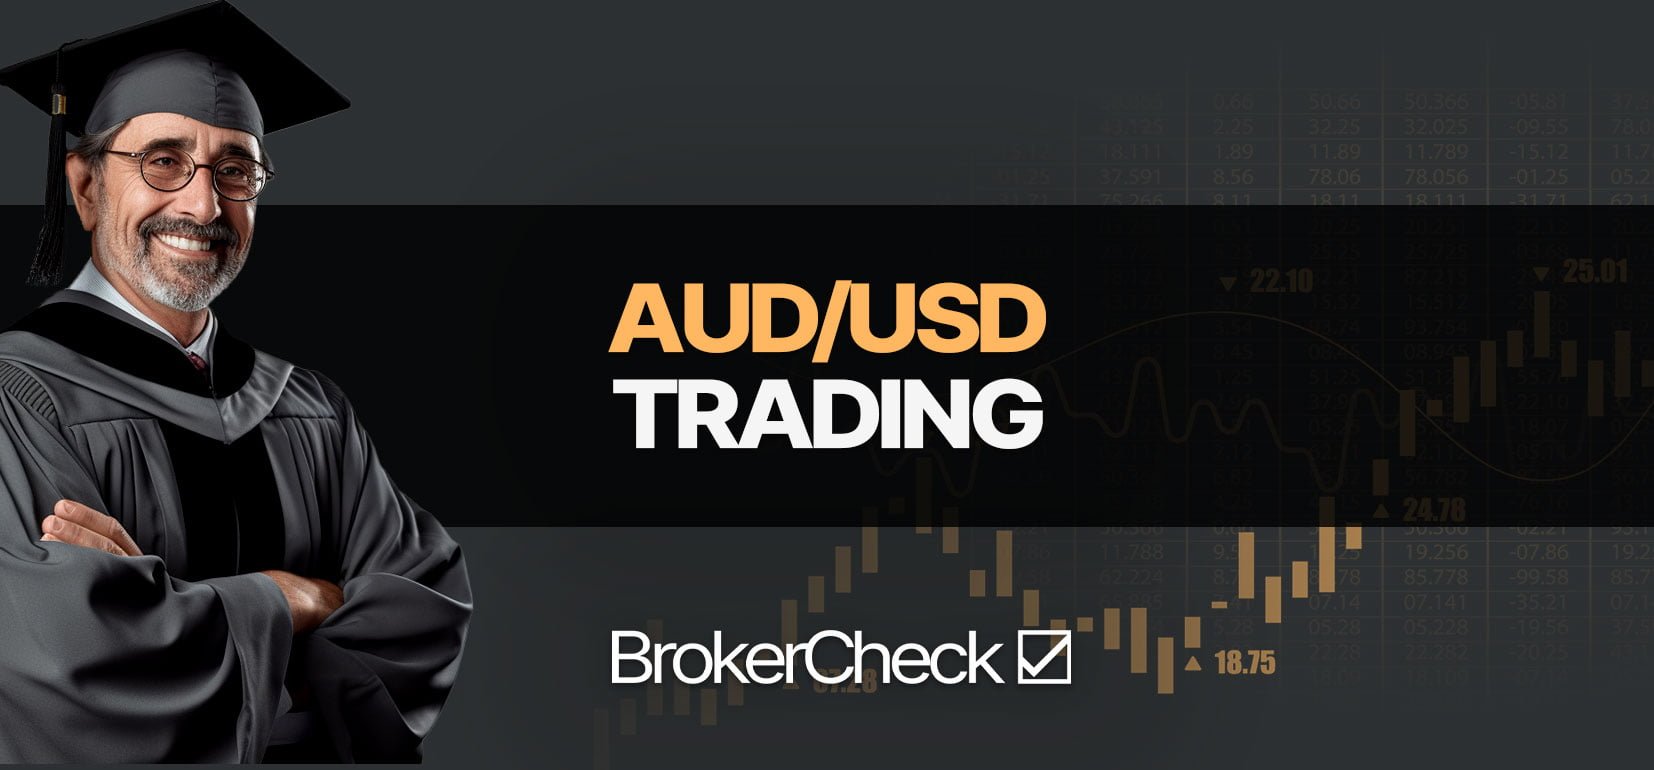 How To Trade AUD/USD успешно